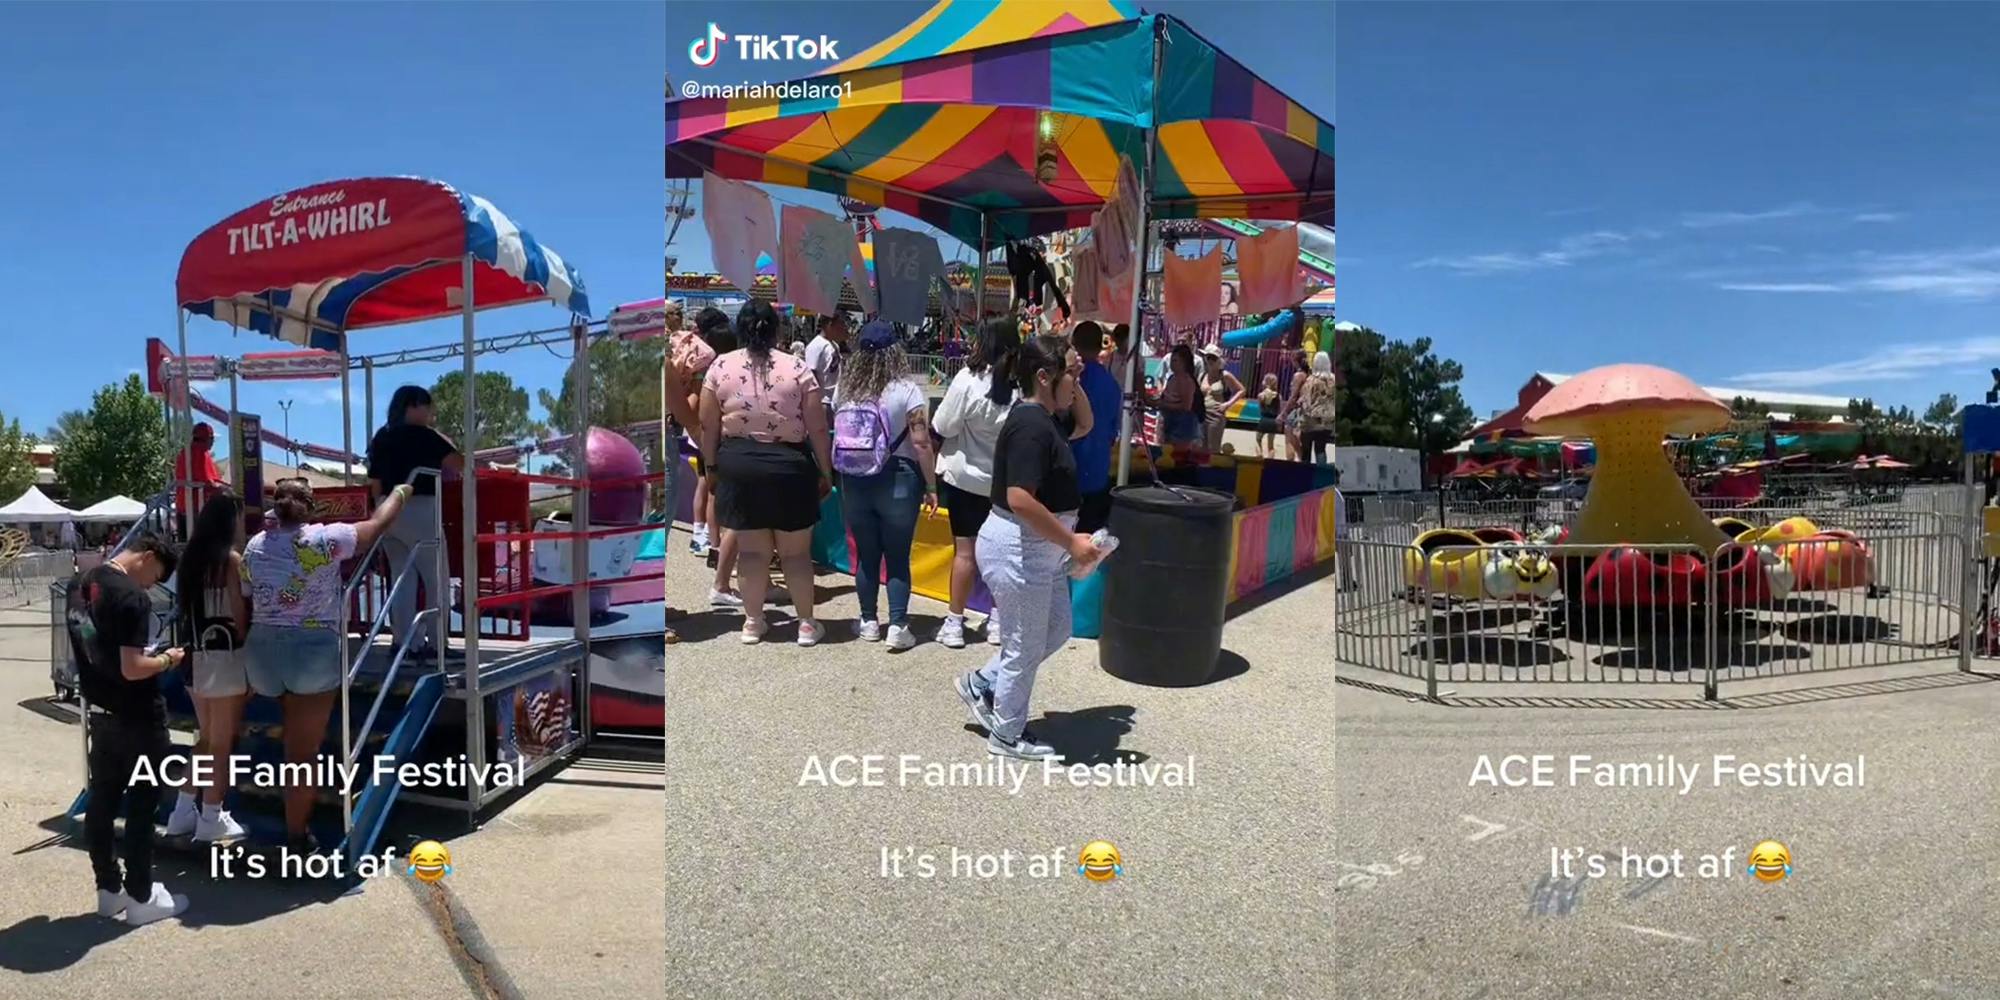 Carnival rides in a parking lot with caption "ACE Family Festival, It's hot af"